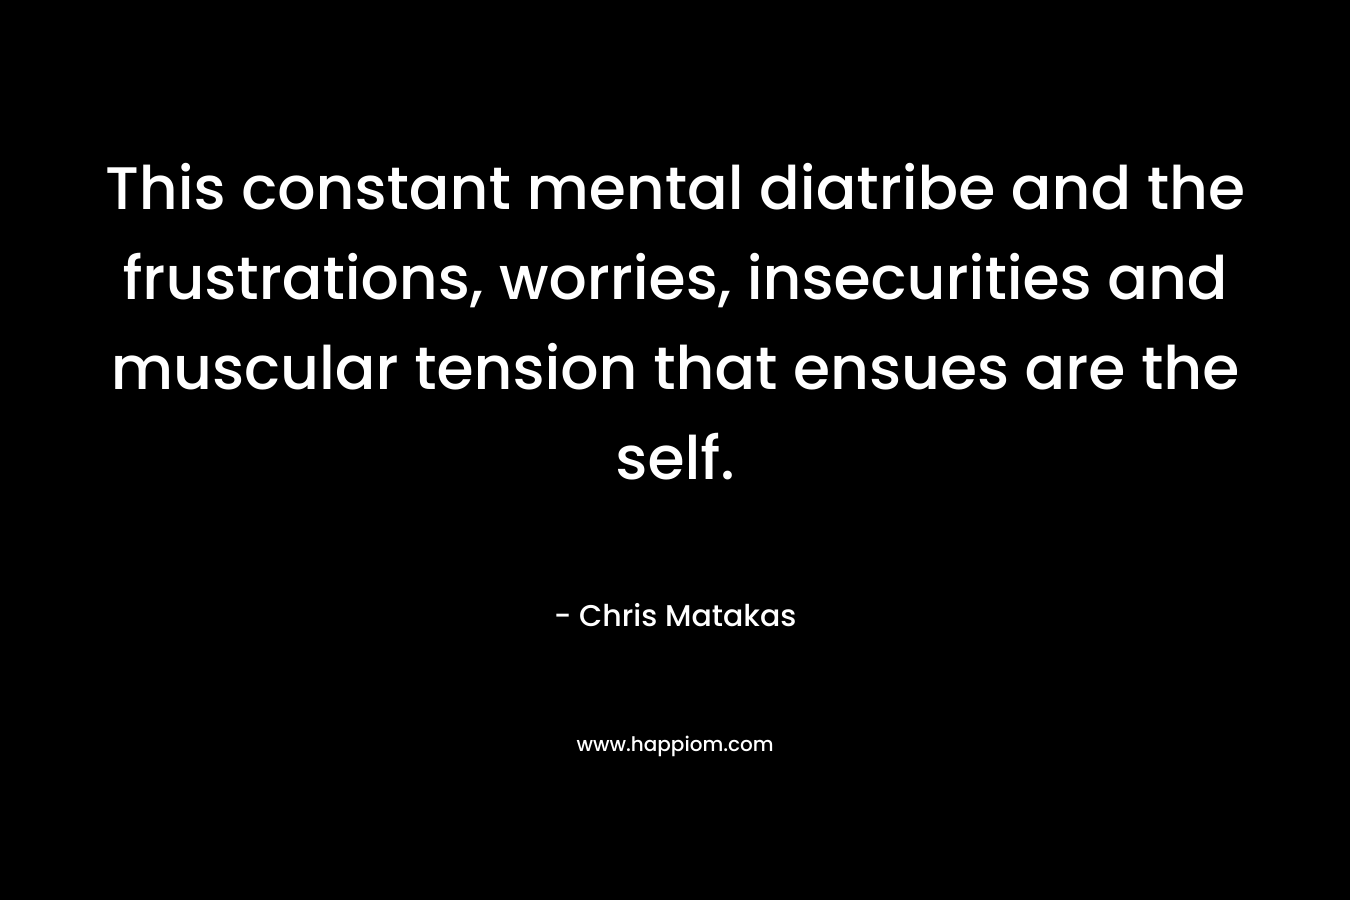 This constant mental diatribe and the frustrations, worries, insecurities and muscular tension that ensues are the self. – Chris Matakas